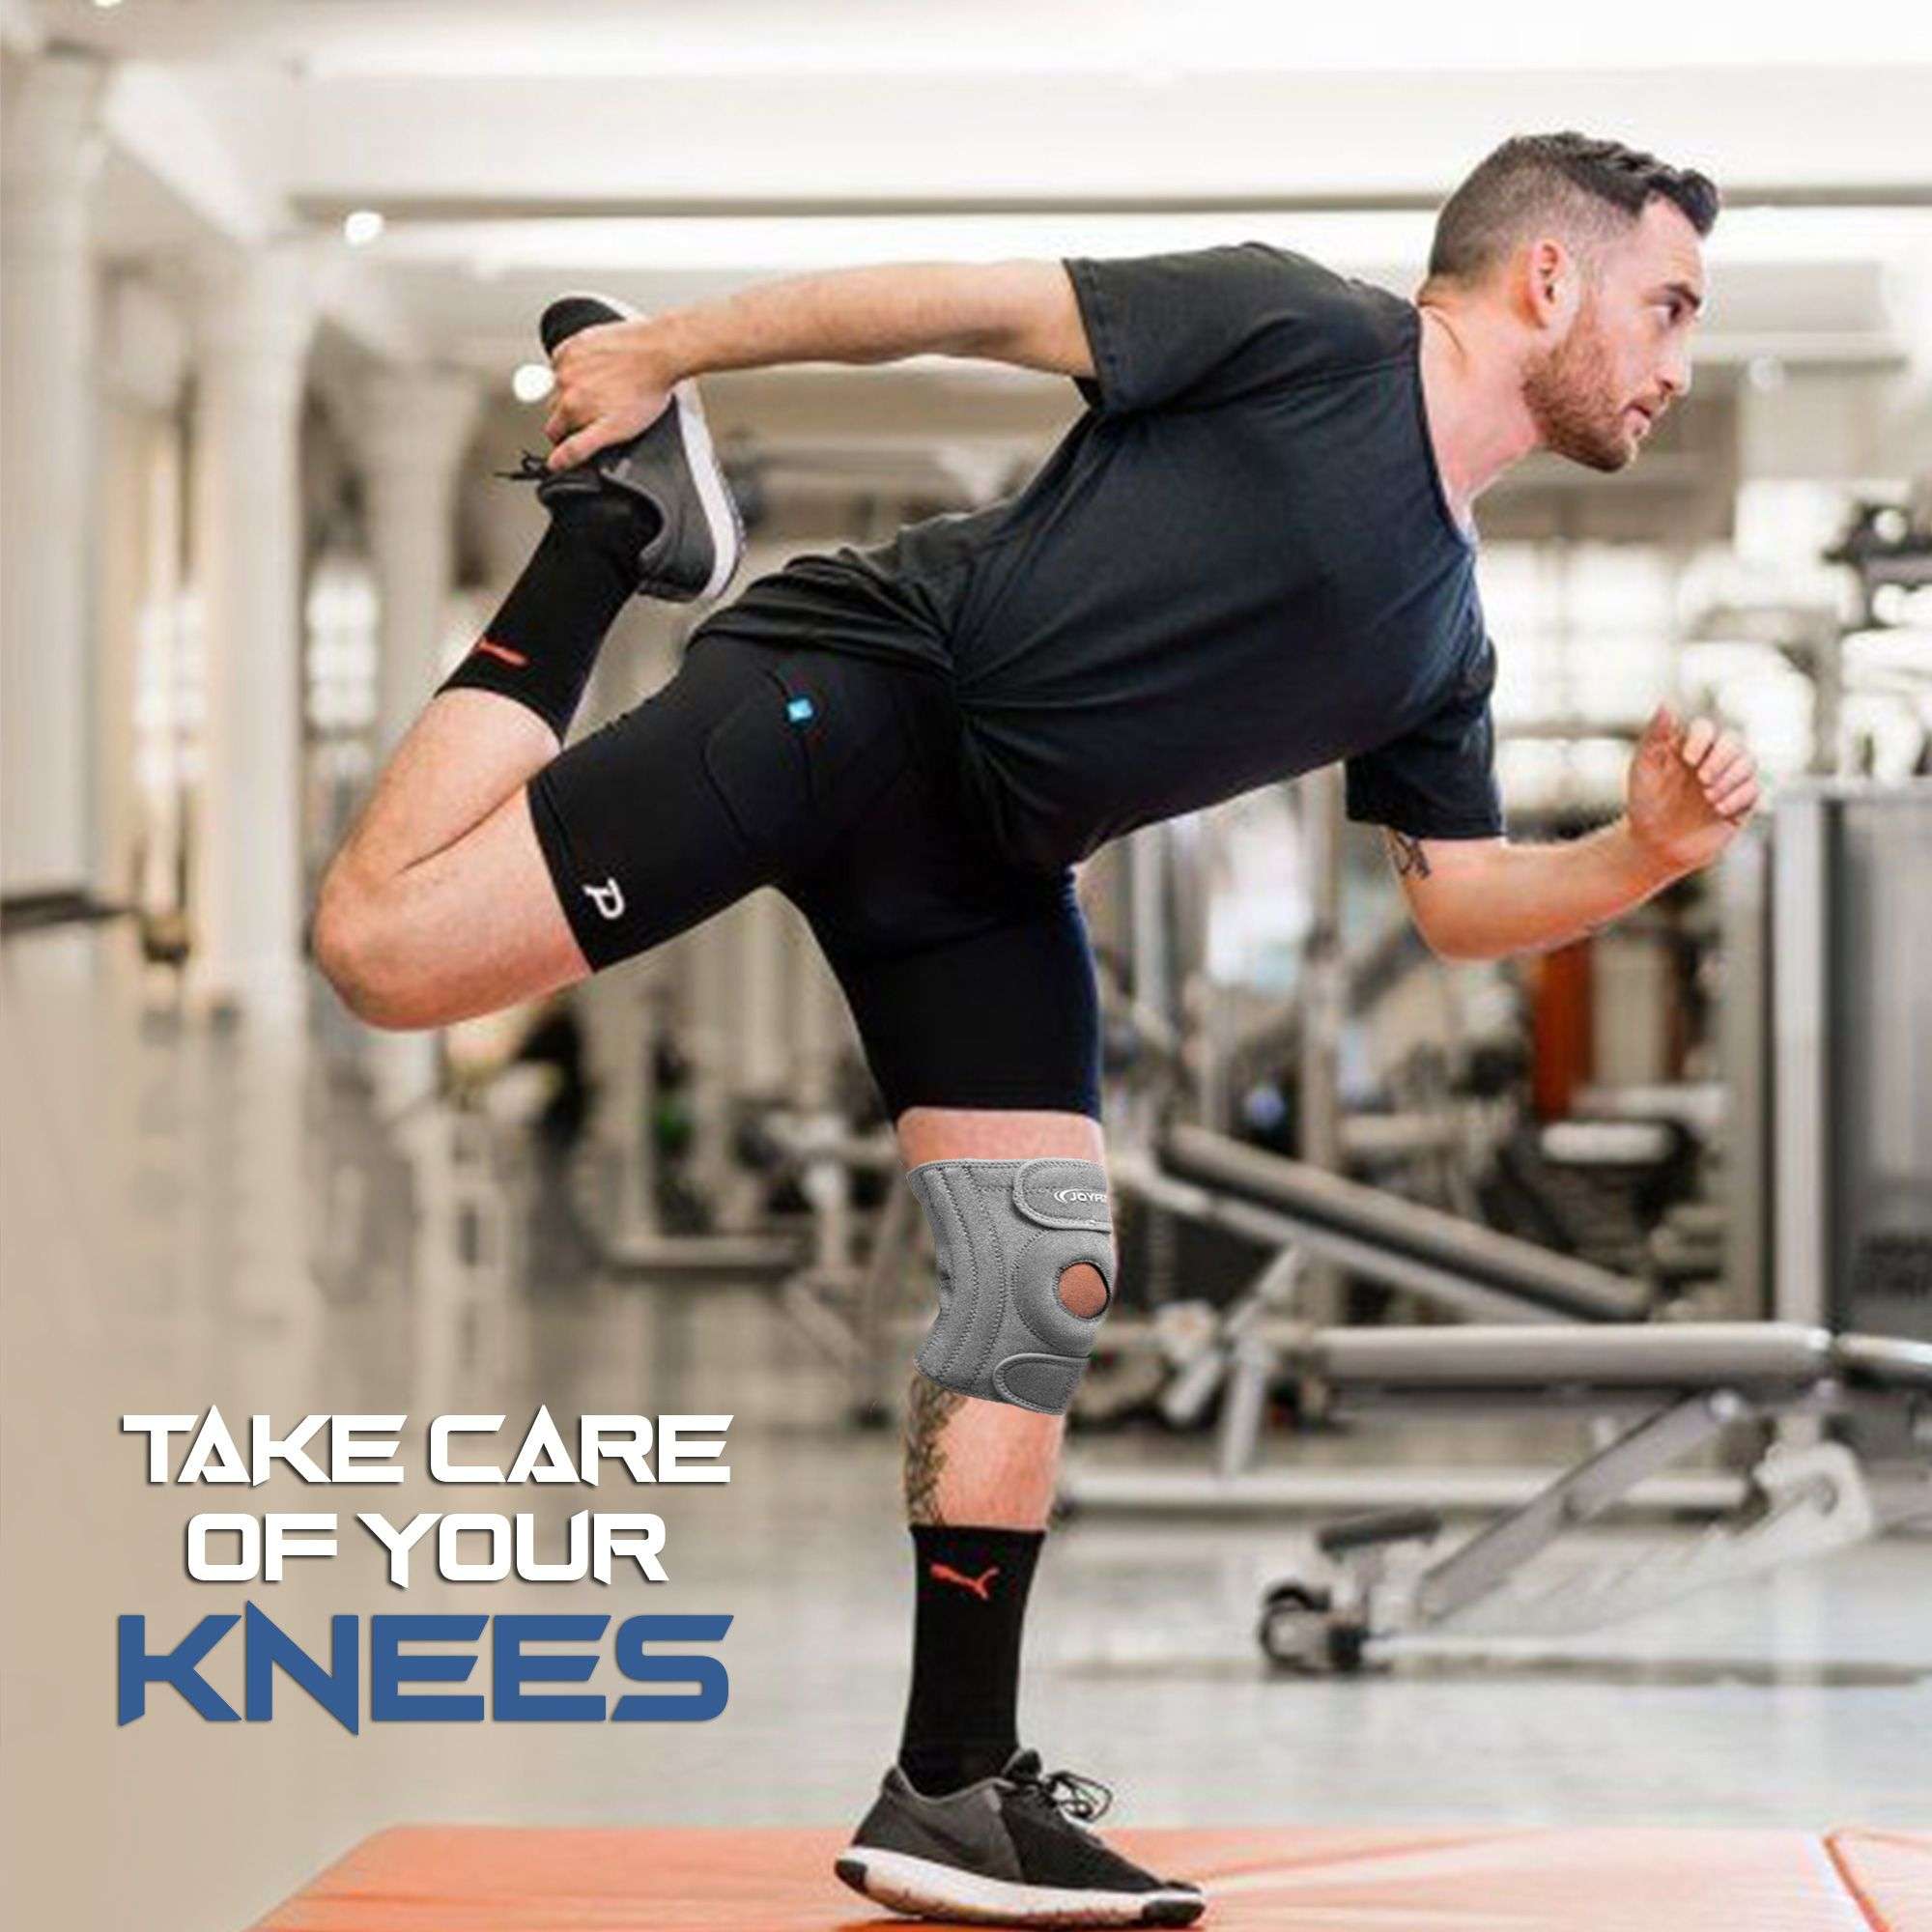 HOW TO PROTECT YOUR KNEES FROM INJURY DURING WEIGHTLIFTING â Joyfit